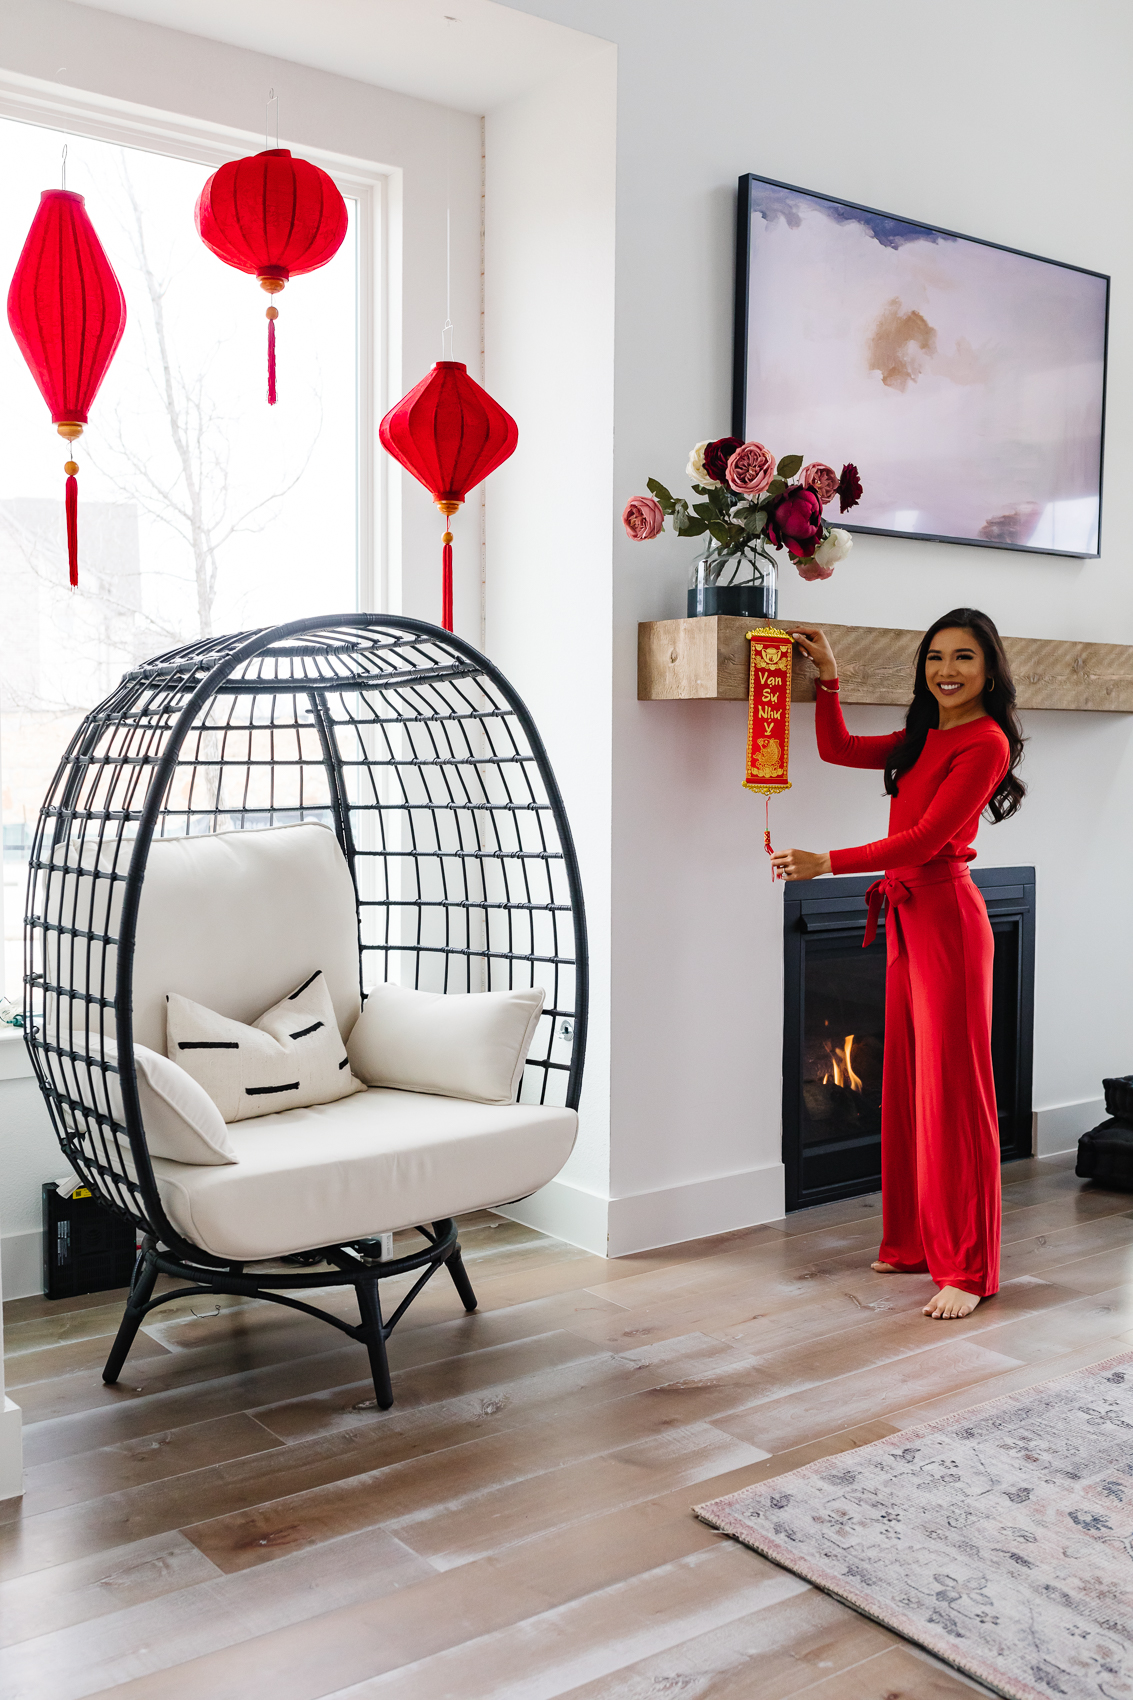 Red silk lanterns and couplets to decorate for Lunar New Year or Tet Vietnamese New Year in a transitional home